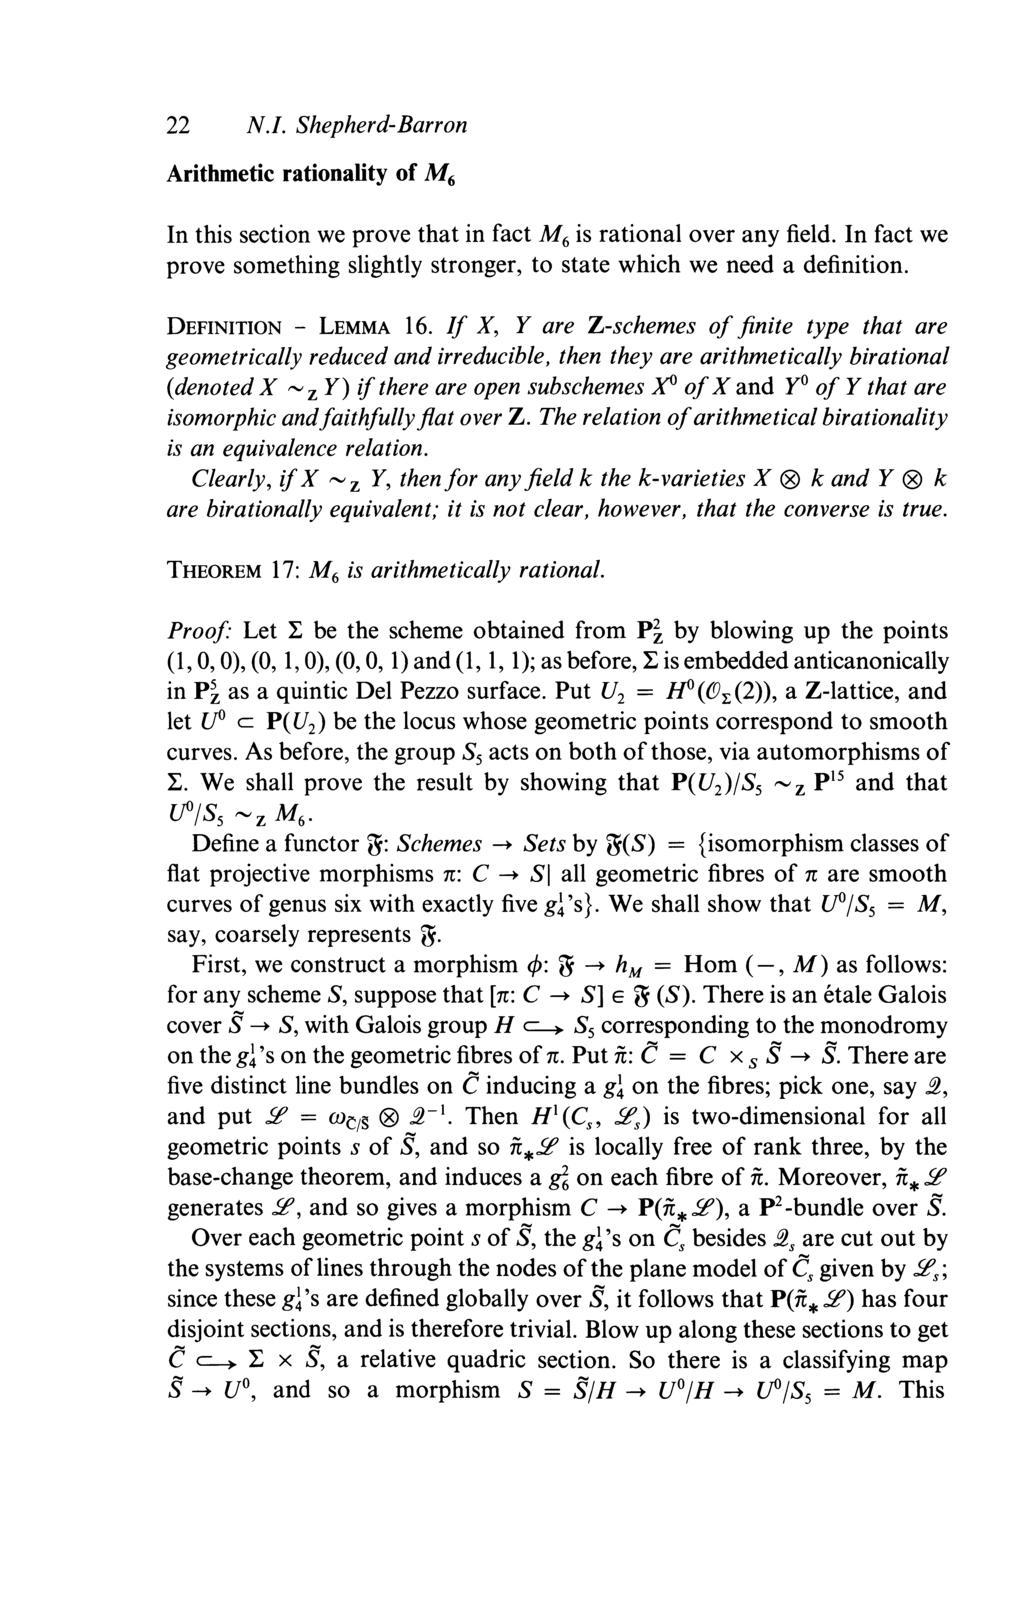 22 Arithmetic rationality of M6 In this section we prove that in fact M6 is rational over any field. In fact we prove something slightly stronger, to state which we need a definition.